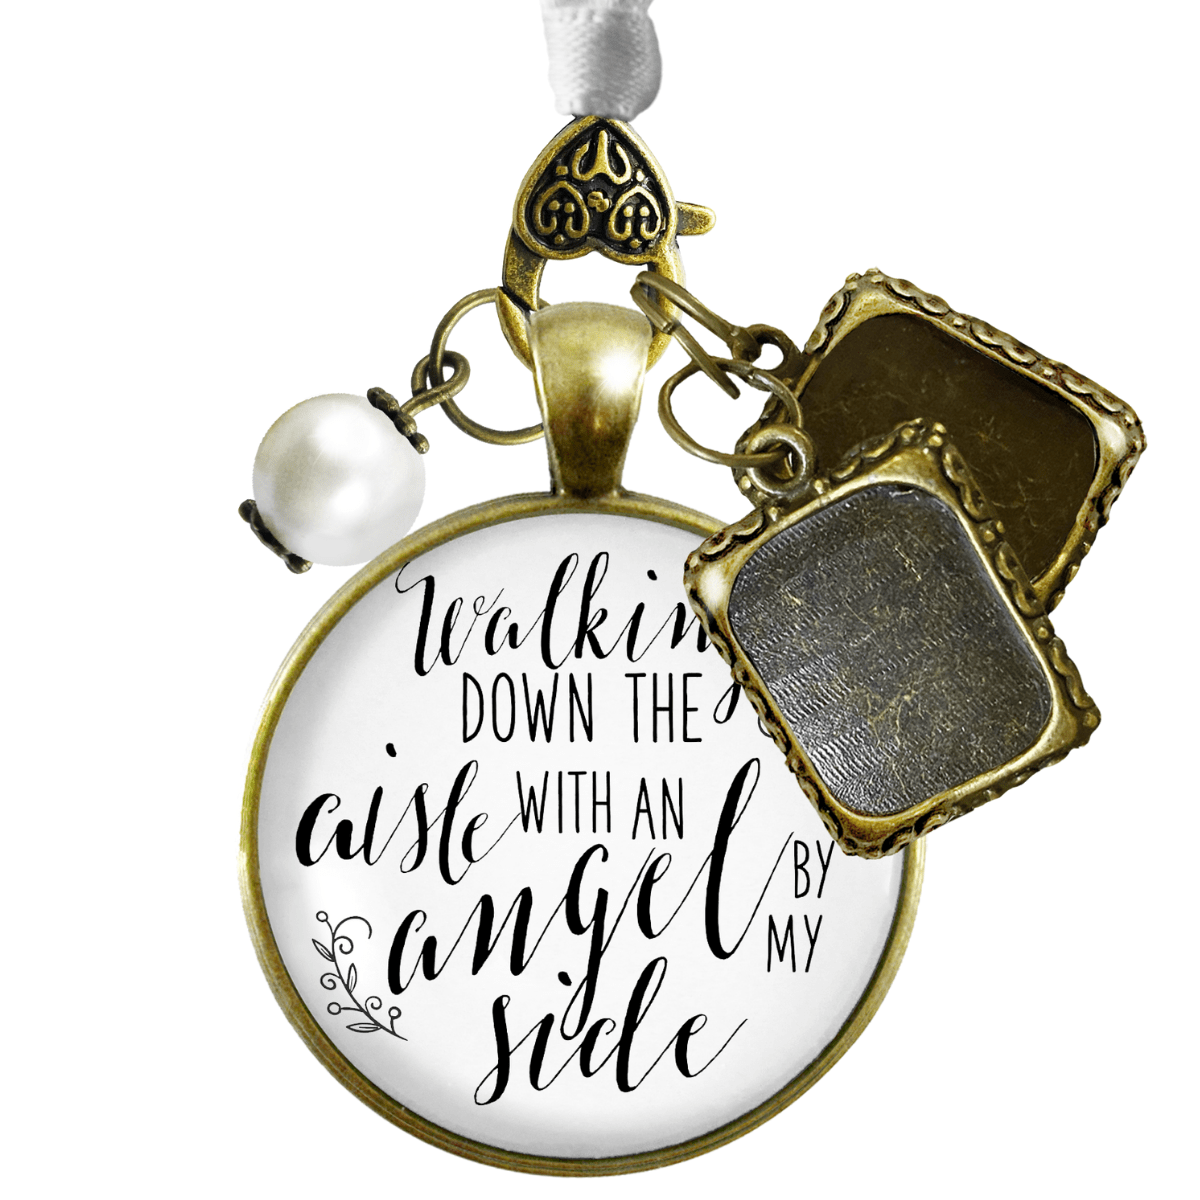 Walking Down The Aisle With An Angel By My Side - BRONZE - WHITE - WHITE BEAD - 2 FRAMES